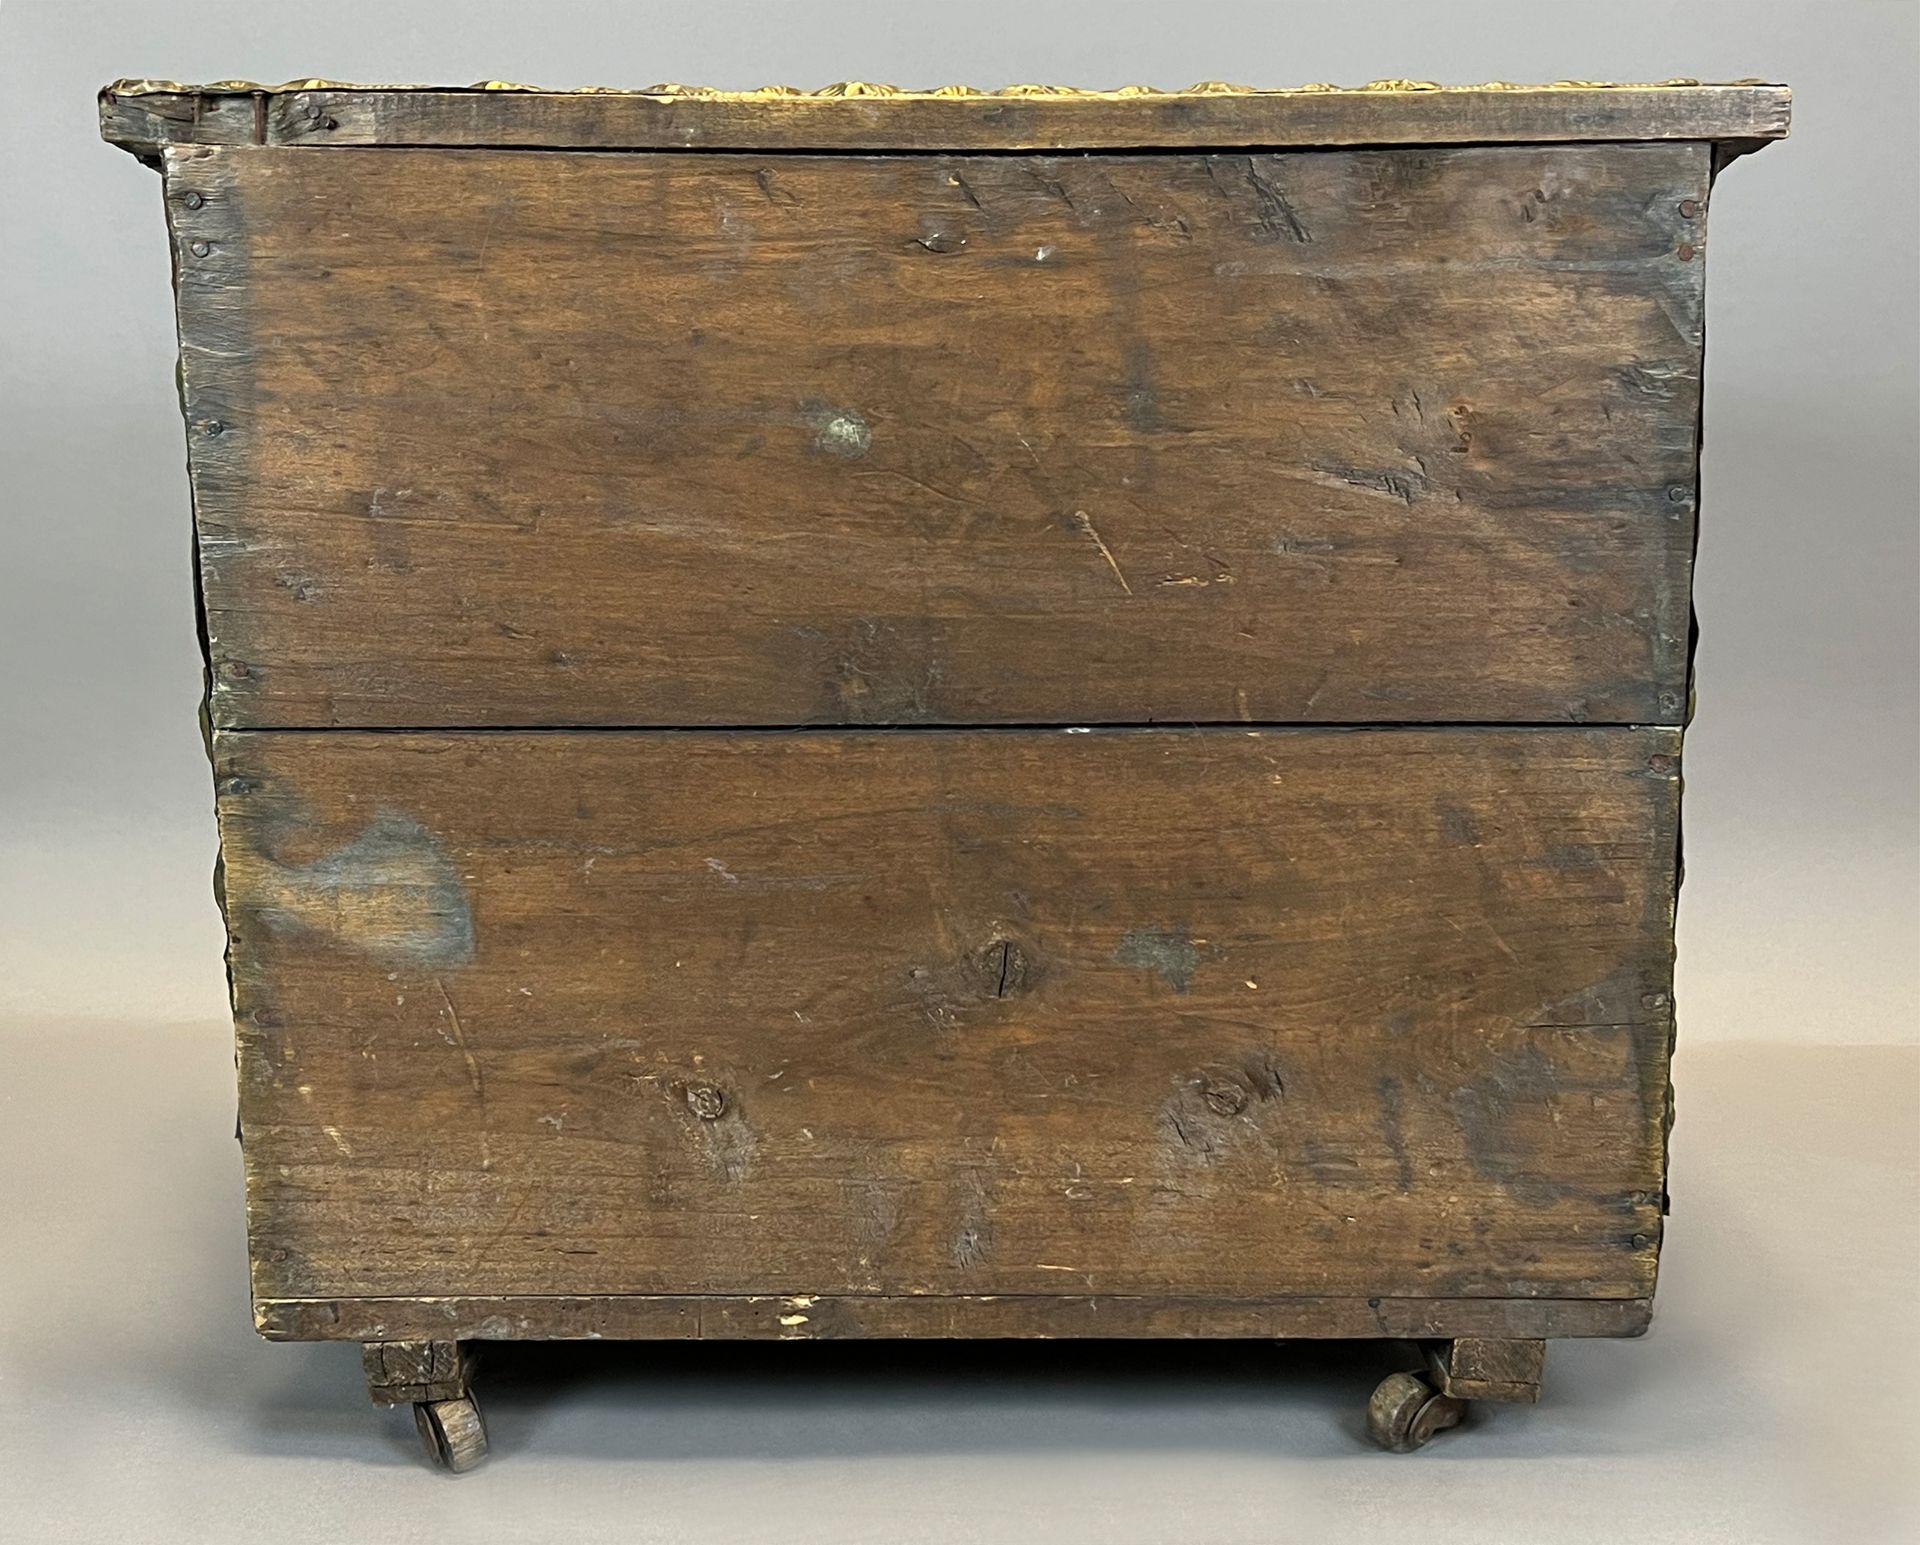 Small wooden chest with brass plate decoration. Probably 19th century. - Image 4 of 15